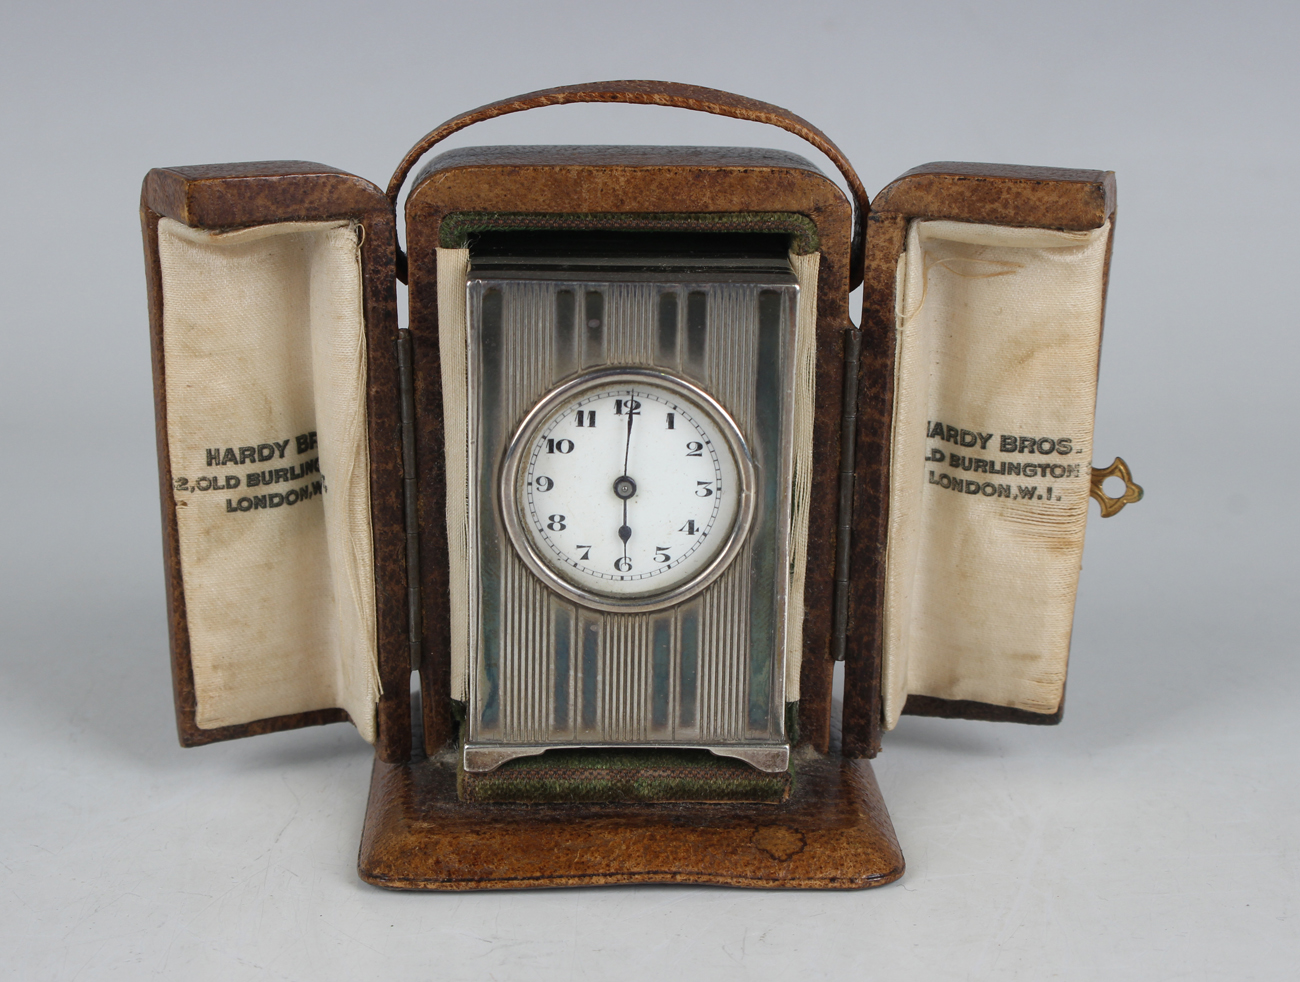 An early 20th century French silver miniature carriage timepiece, the movement with platform